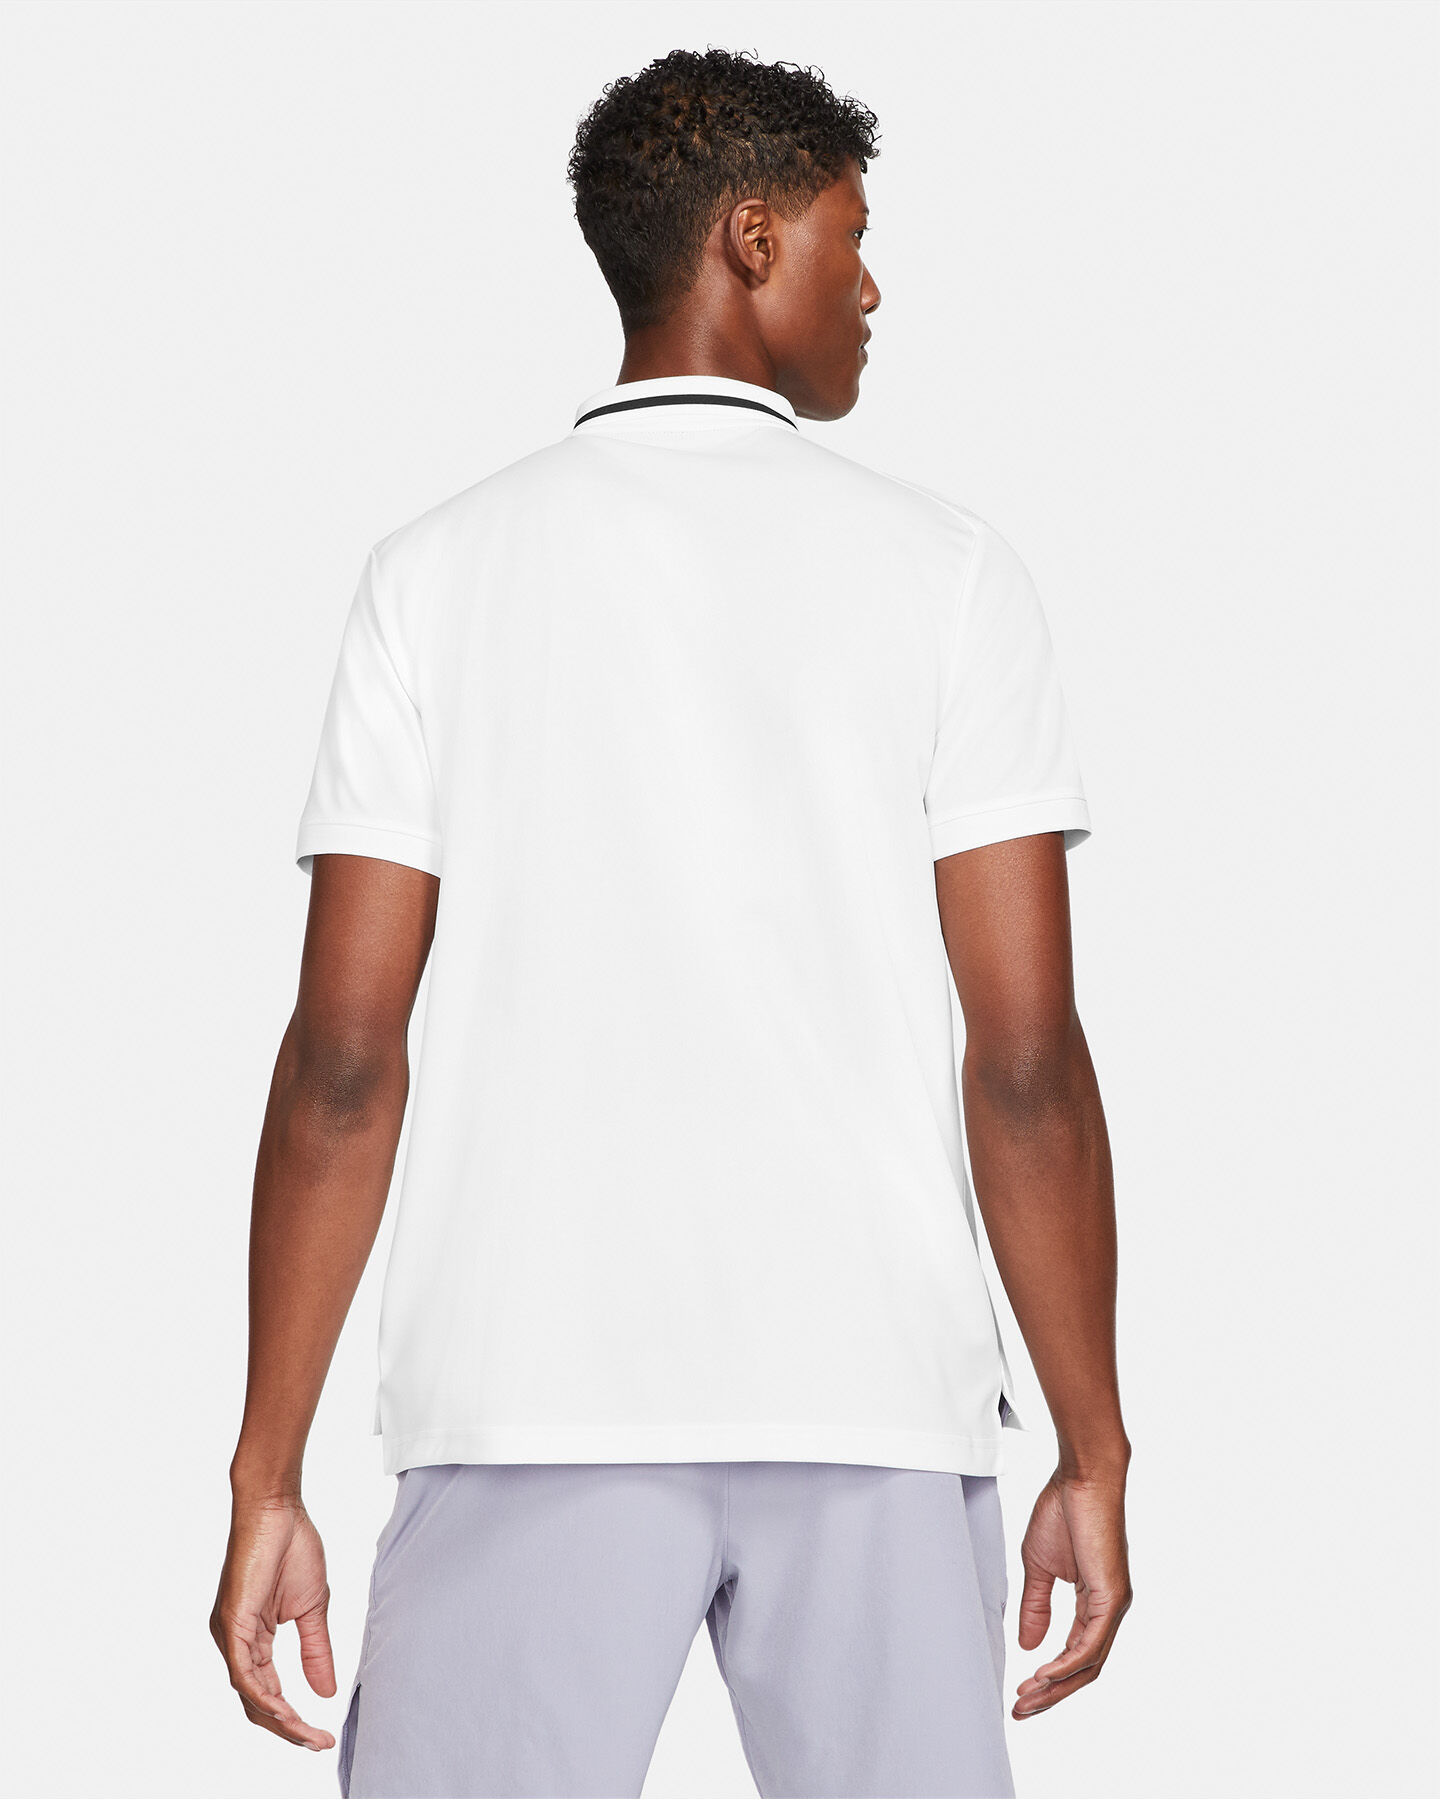  Polo tennis NIKE VICTORY M S5269503|100|S scatto 1